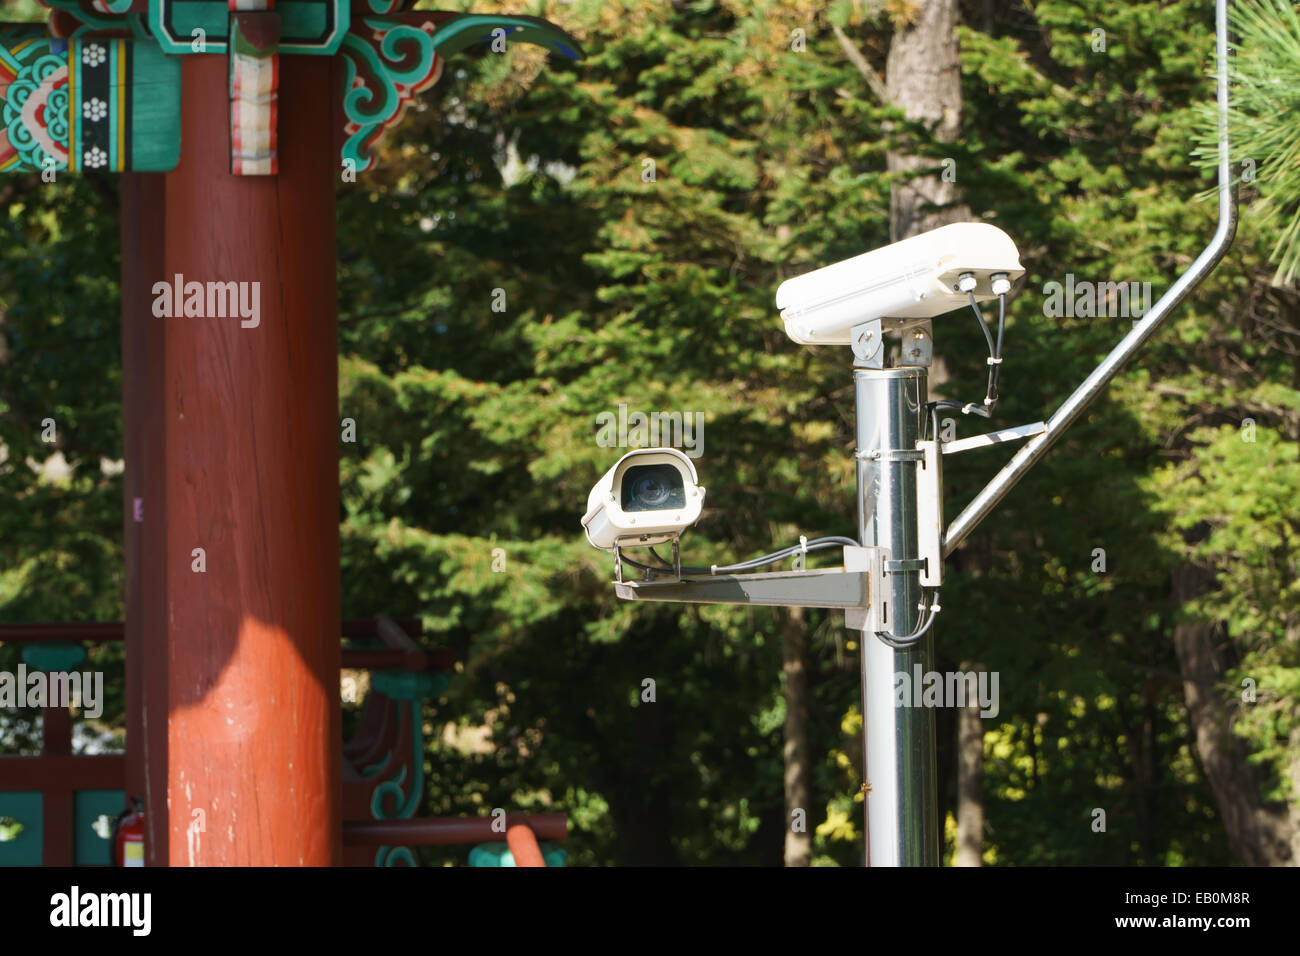 cctv cameras on a pole in outdoor Stock Photo